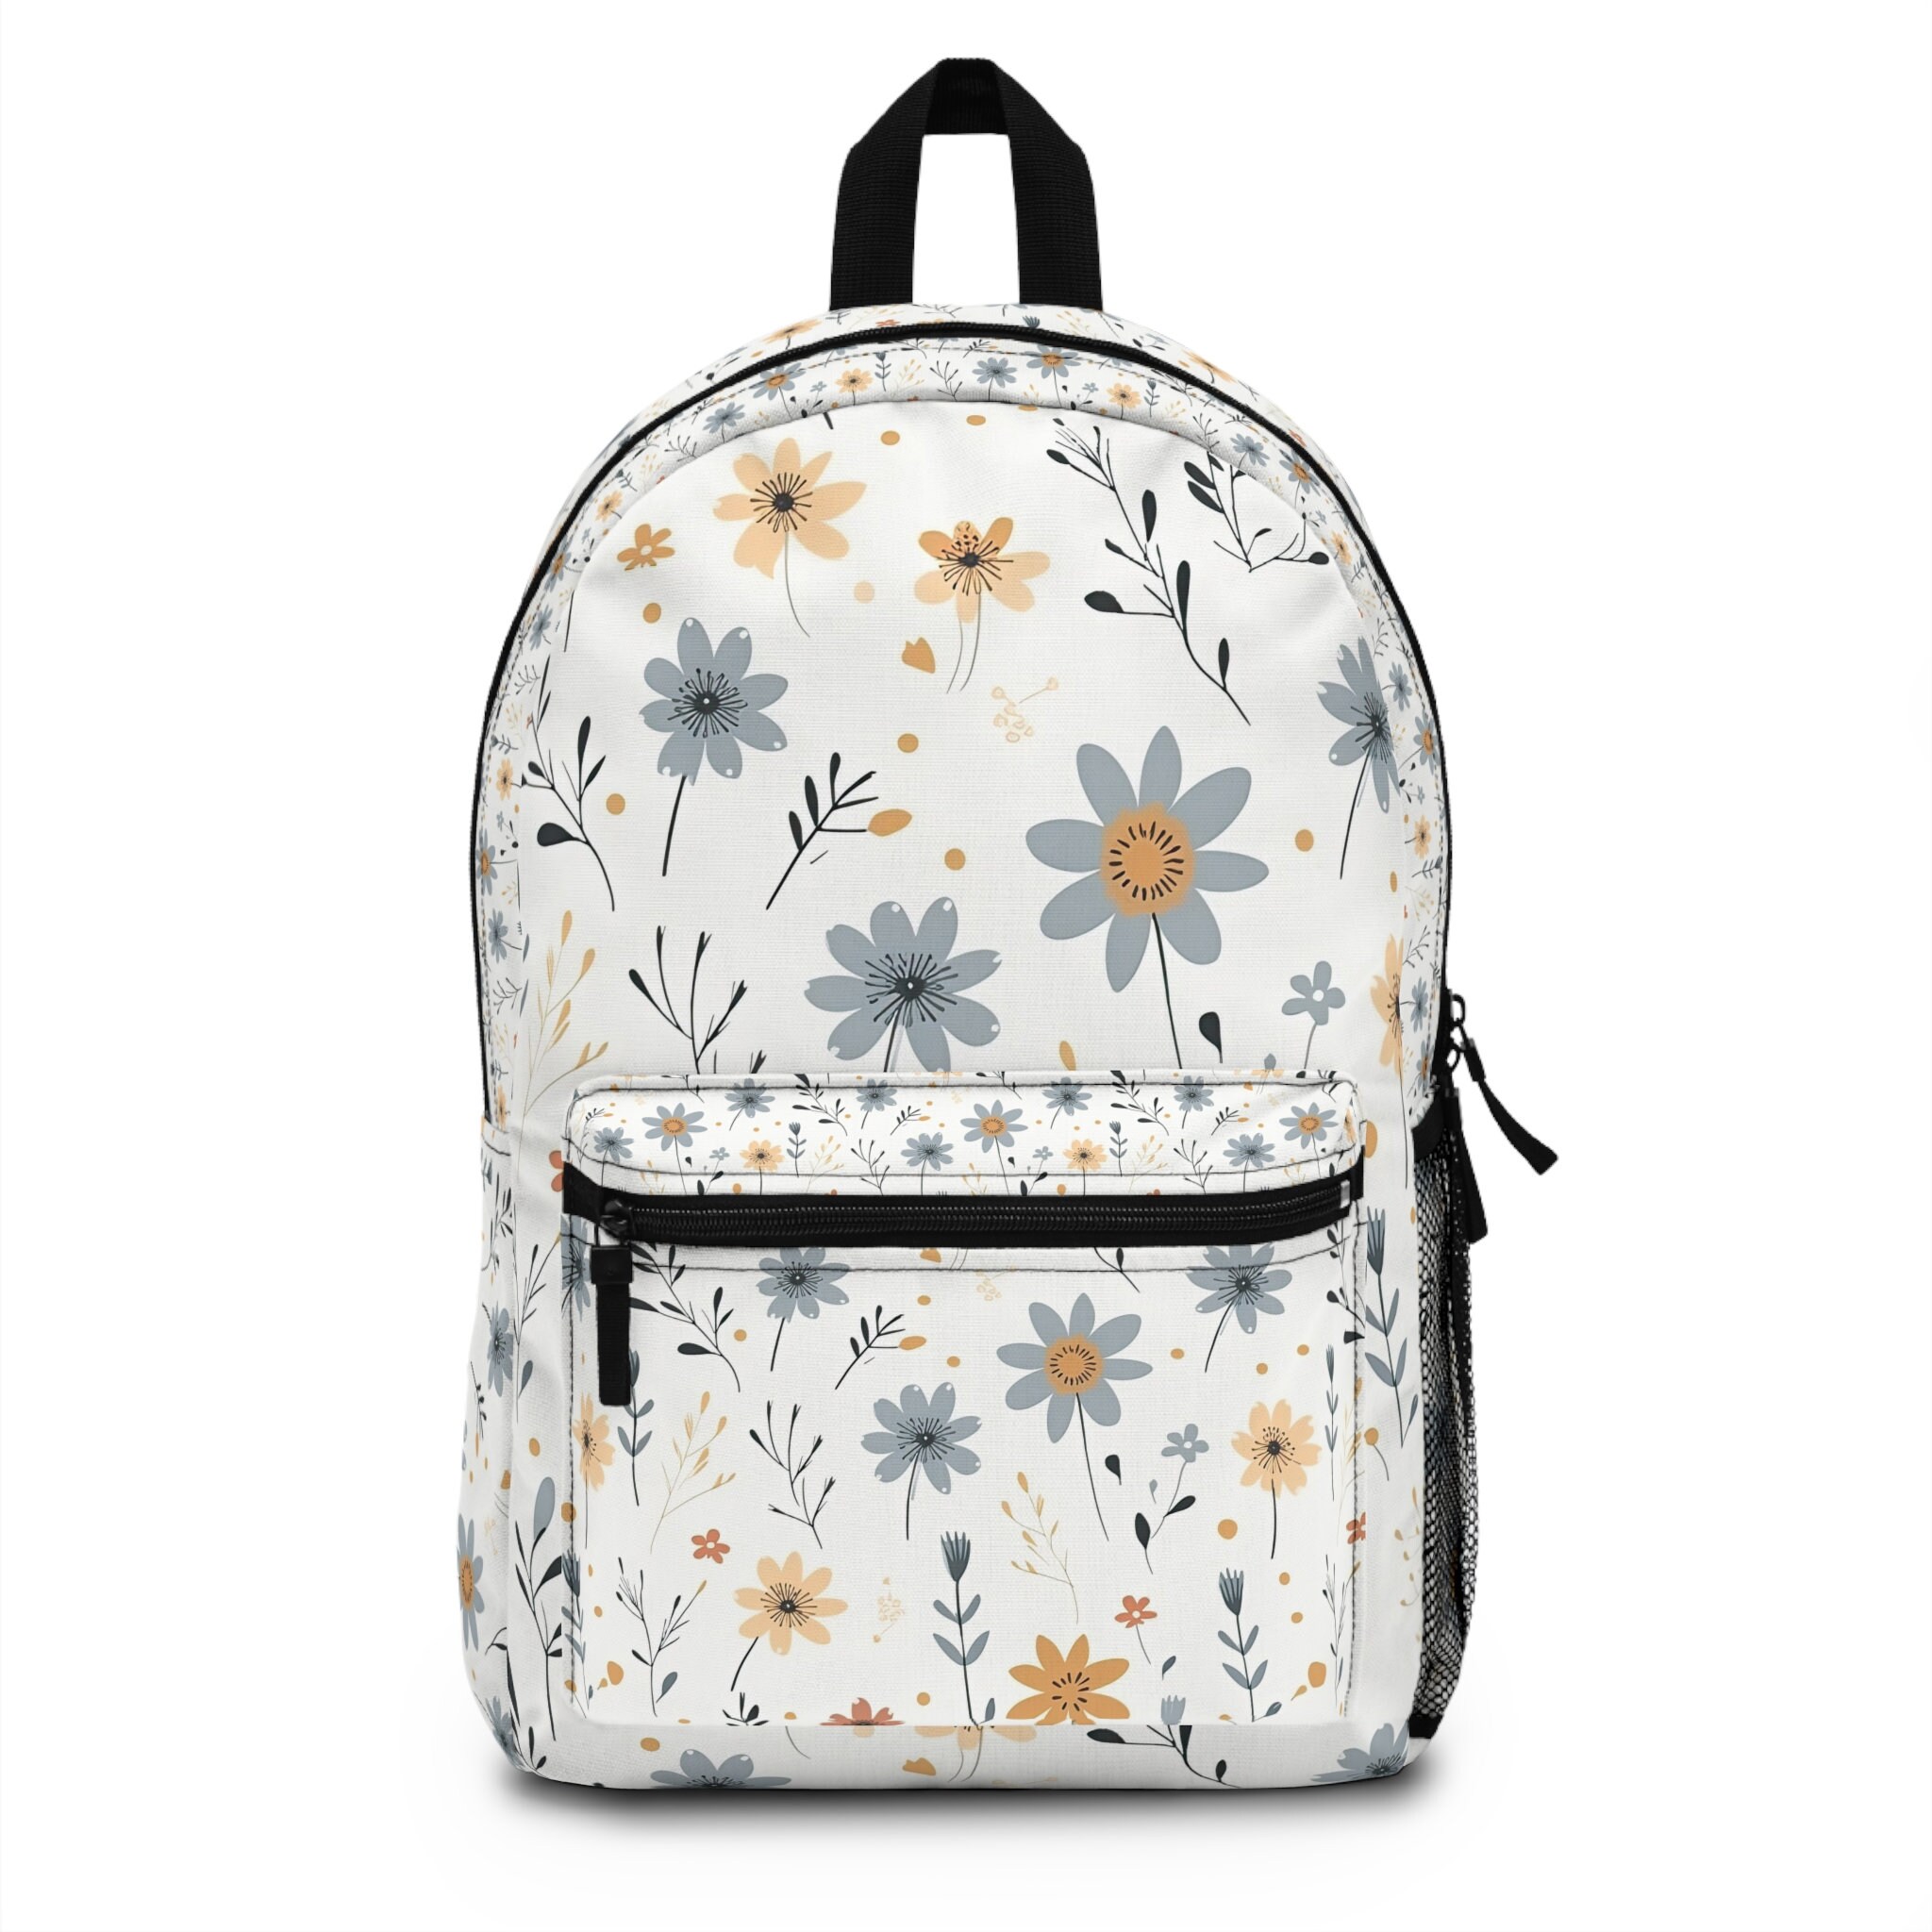 Discover 可愛い花 花柄 スクールバッグ ビンテージレトロ デザイン Floral Backpacks